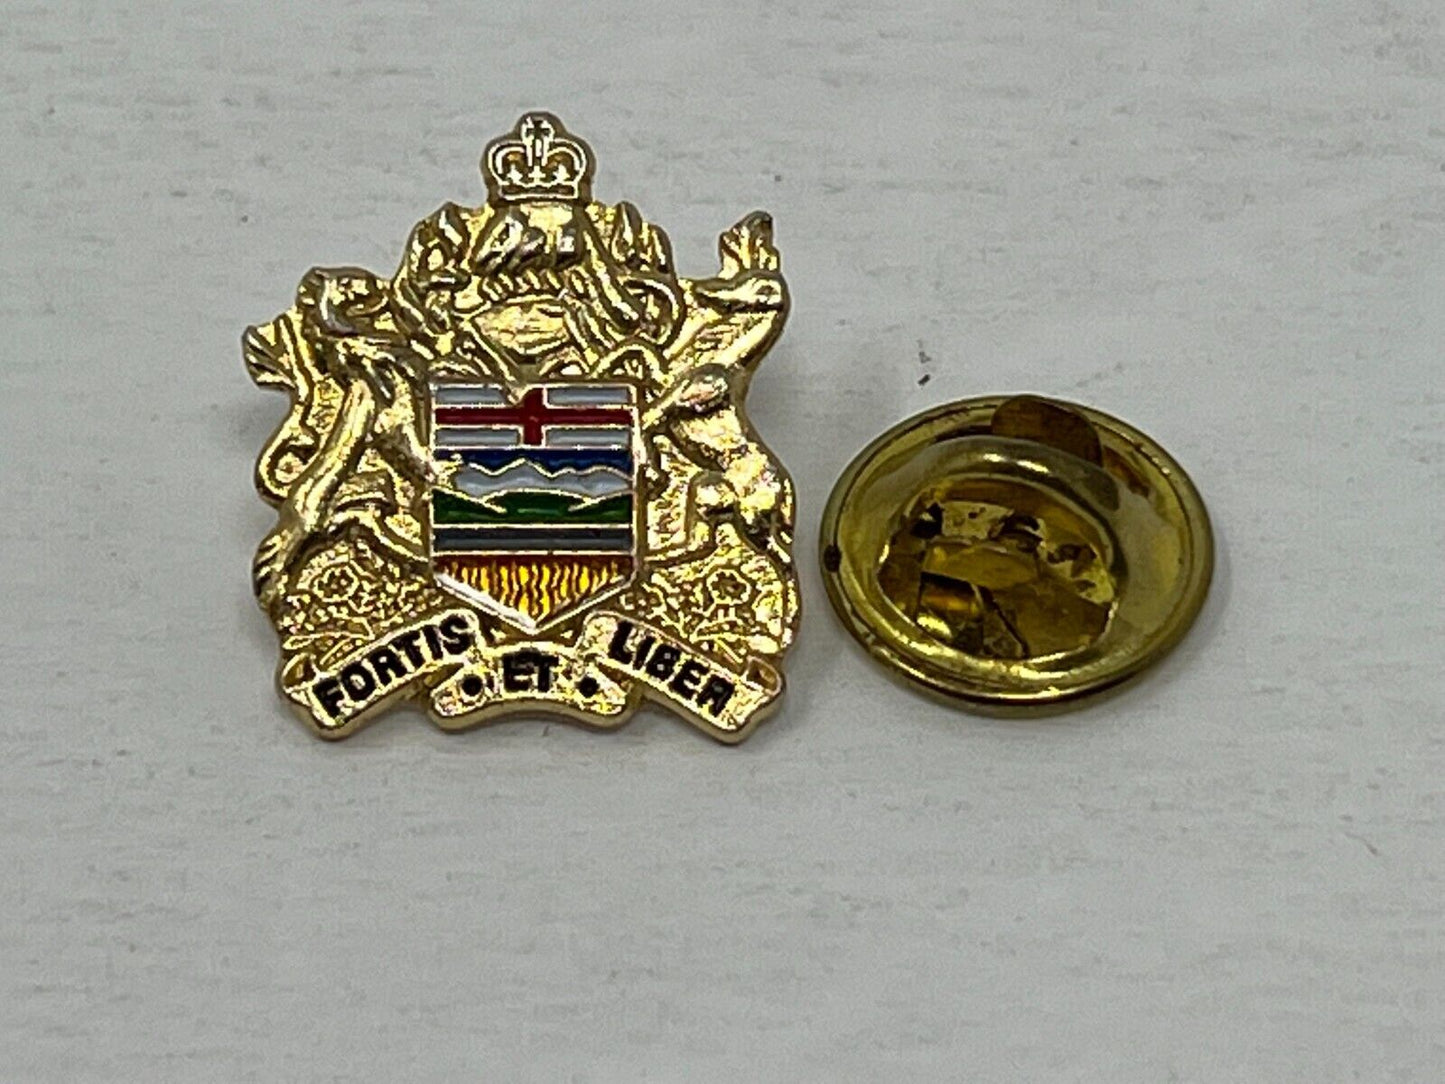 Alberta Coat of Arms Fortis et Liber (Strong and Free) Patriotic Lapel Pin